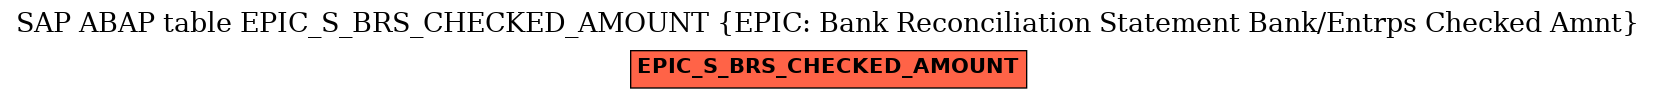 E-R Diagram for table EPIC_S_BRS_CHECKED_AMOUNT (EPIC: Bank Reconciliation Statement Bank/Entrps Checked Amnt)